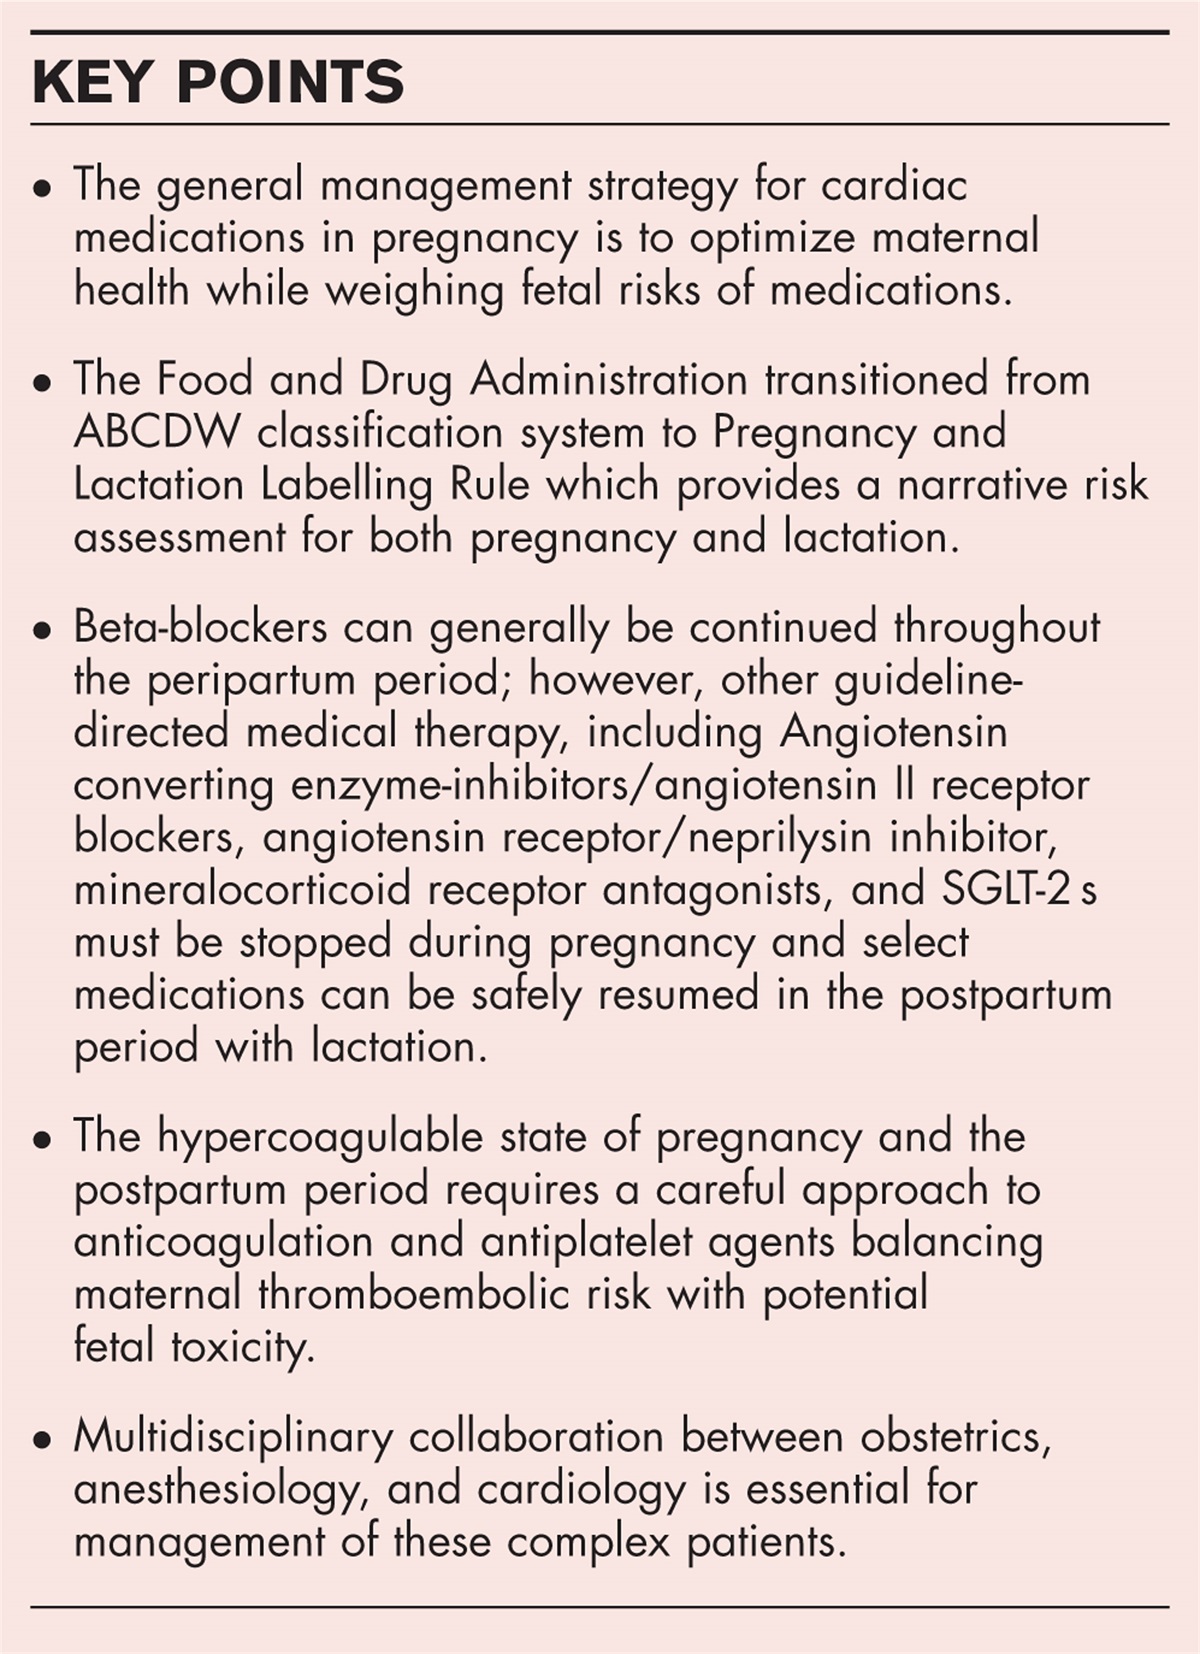 Cardiac medications in obstetric patients